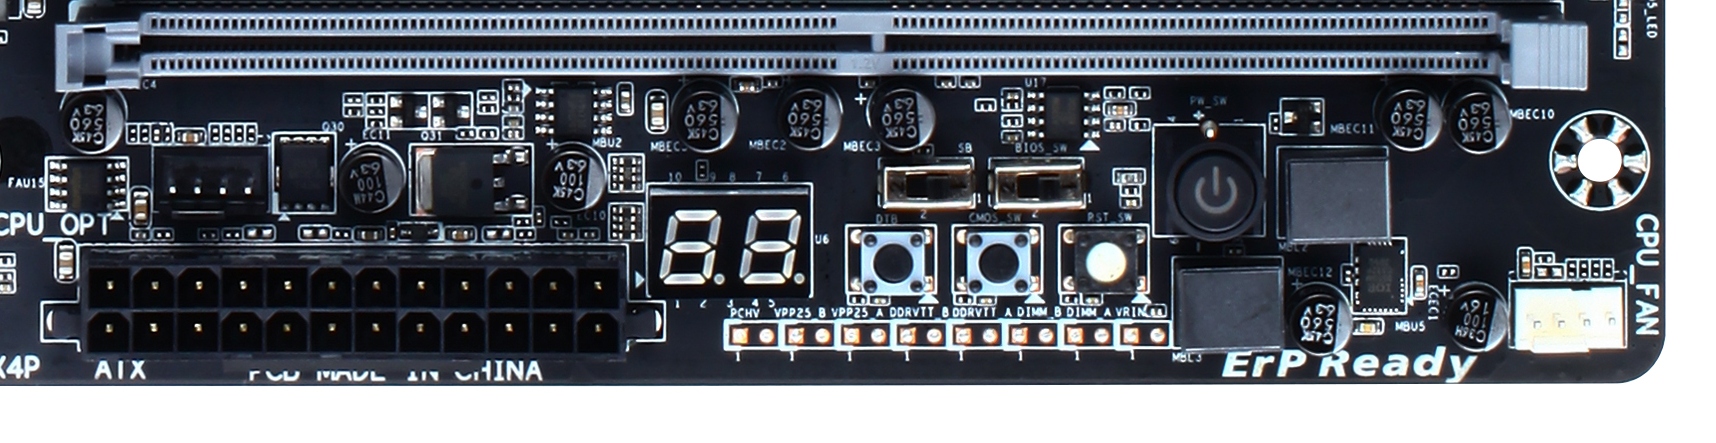 Software - GIGABYTE X99-Gaming G1 WIFI Motherboard Review